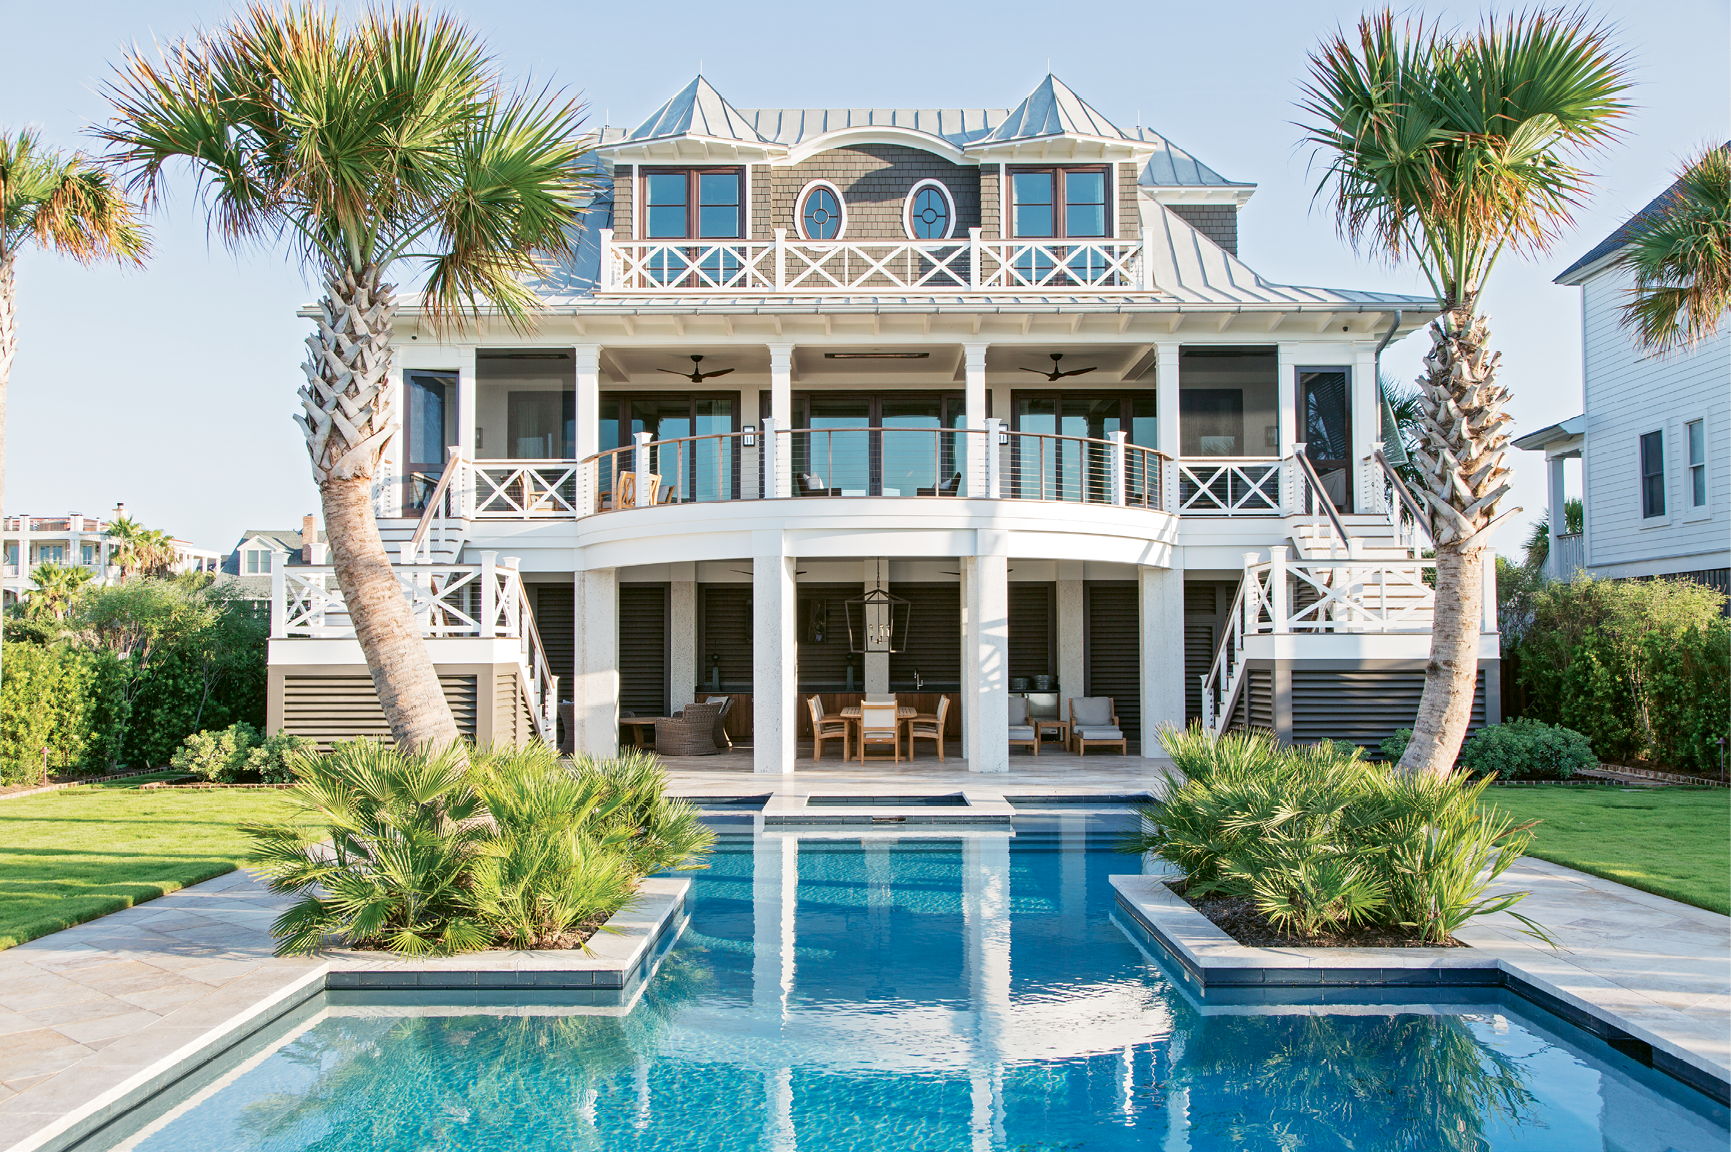 Beachside Oasis: Homeowners Mike and Mary Lamach worked with architect Steve Herlong and interior designer David Smith to conjure their vacation home; the symmetrical design is influenced by both Caribbean and Lowcountry architecture.